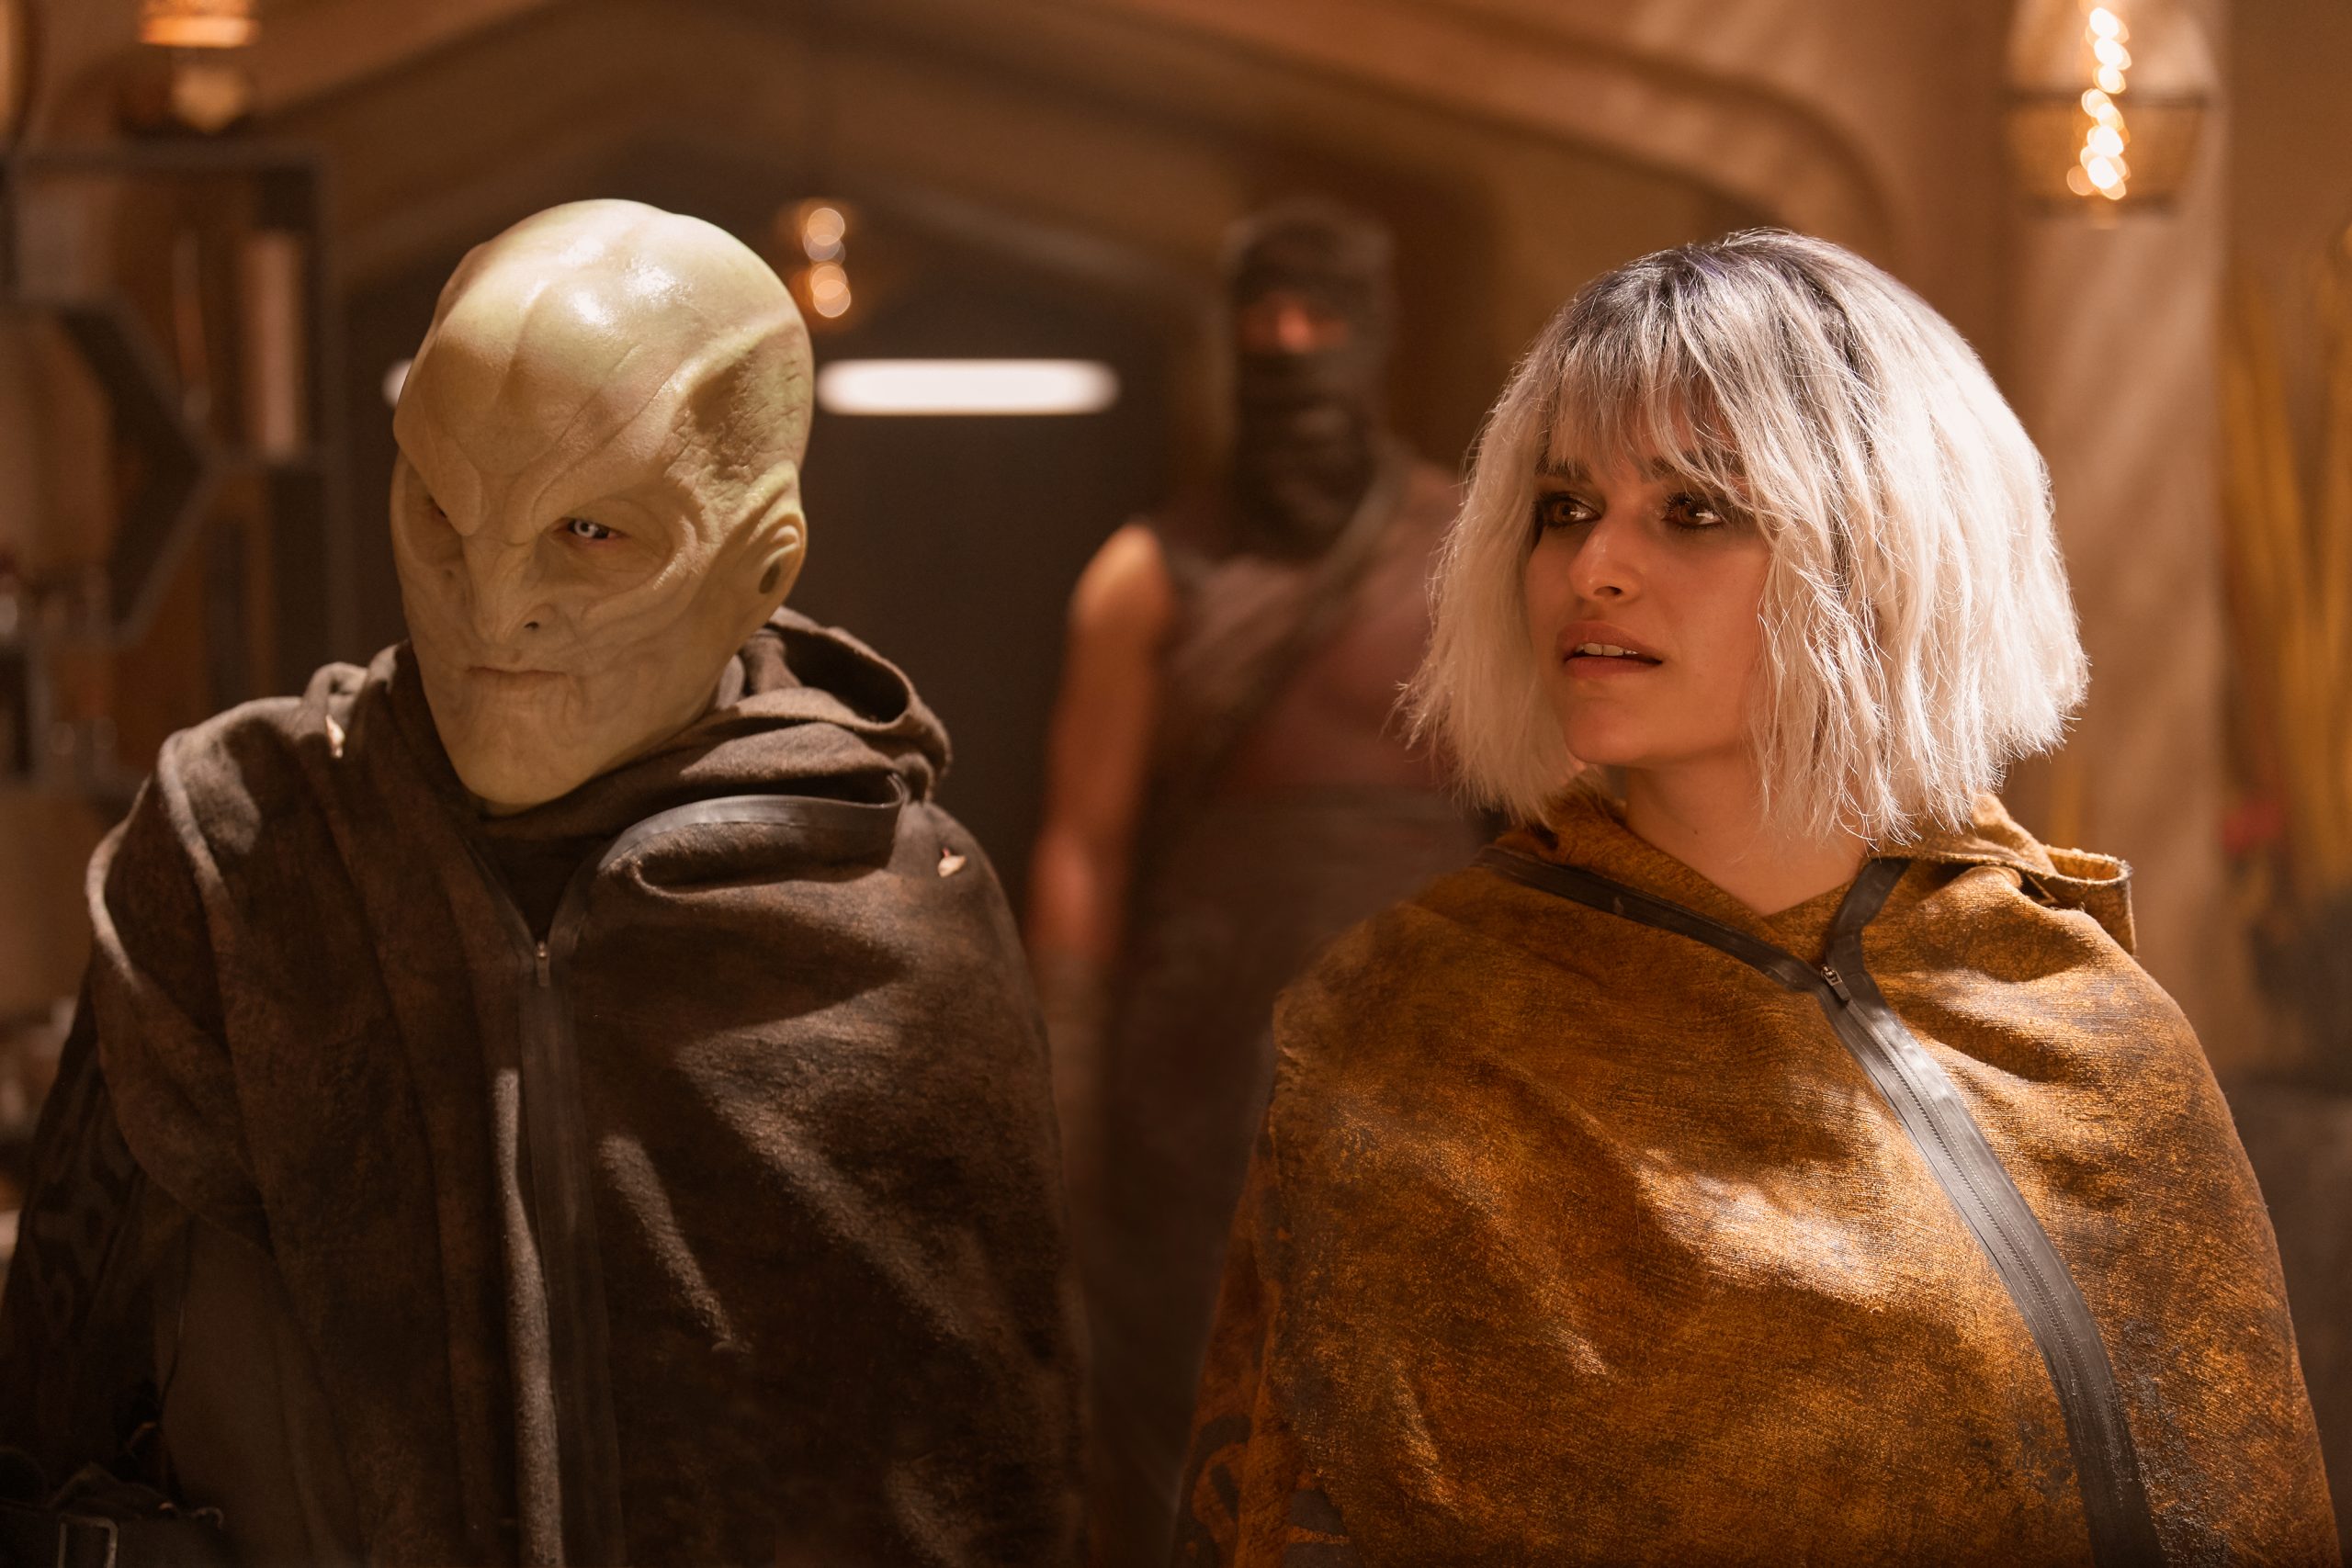 Elias Toufexis as L’ak and Eve Harlow as Malinne Ravel